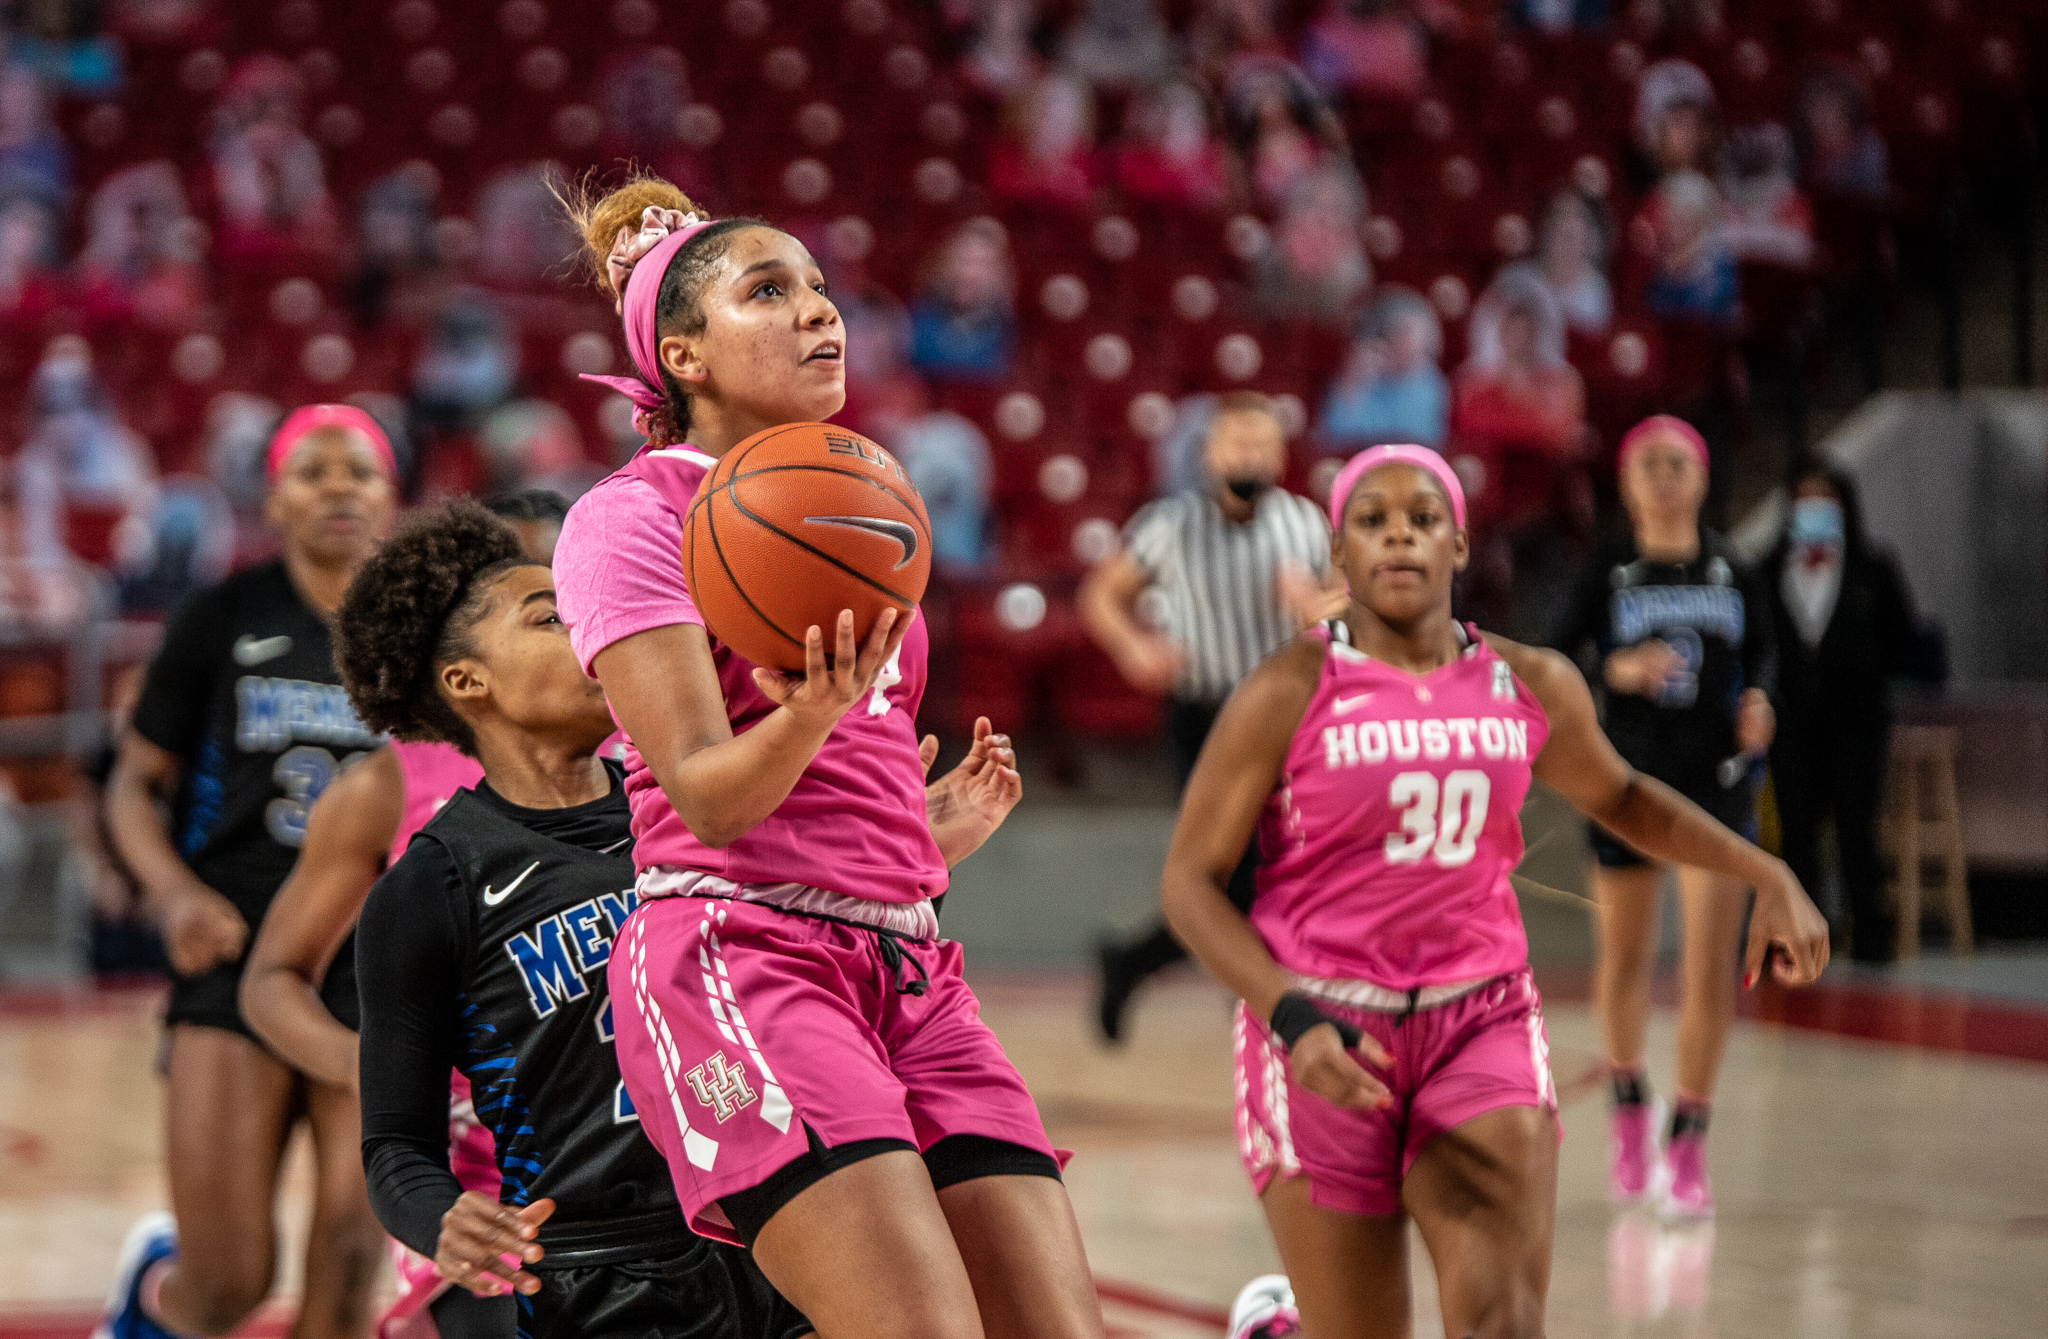 The UH women's basketball program has big expectations for sophomore guard Laila Blair who is coming of a freshman season in which she led the Cougars in scoring. | Andy Yanez/The Cougar